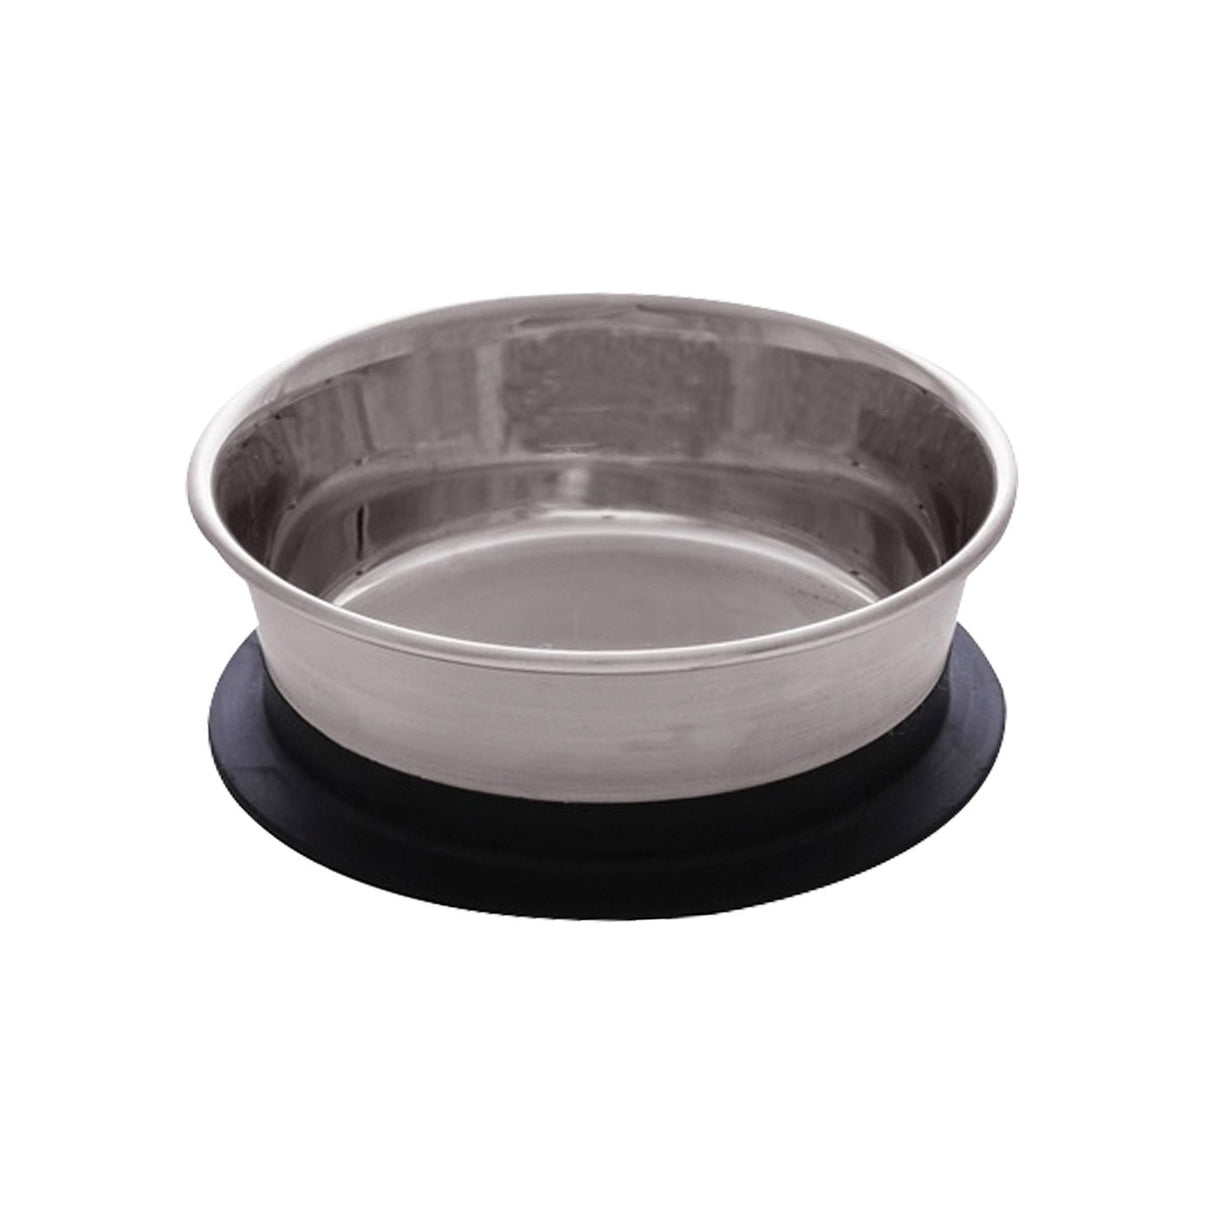 Dogit Stainless Steel Non-Skid Stay-Grip Dog Bowl